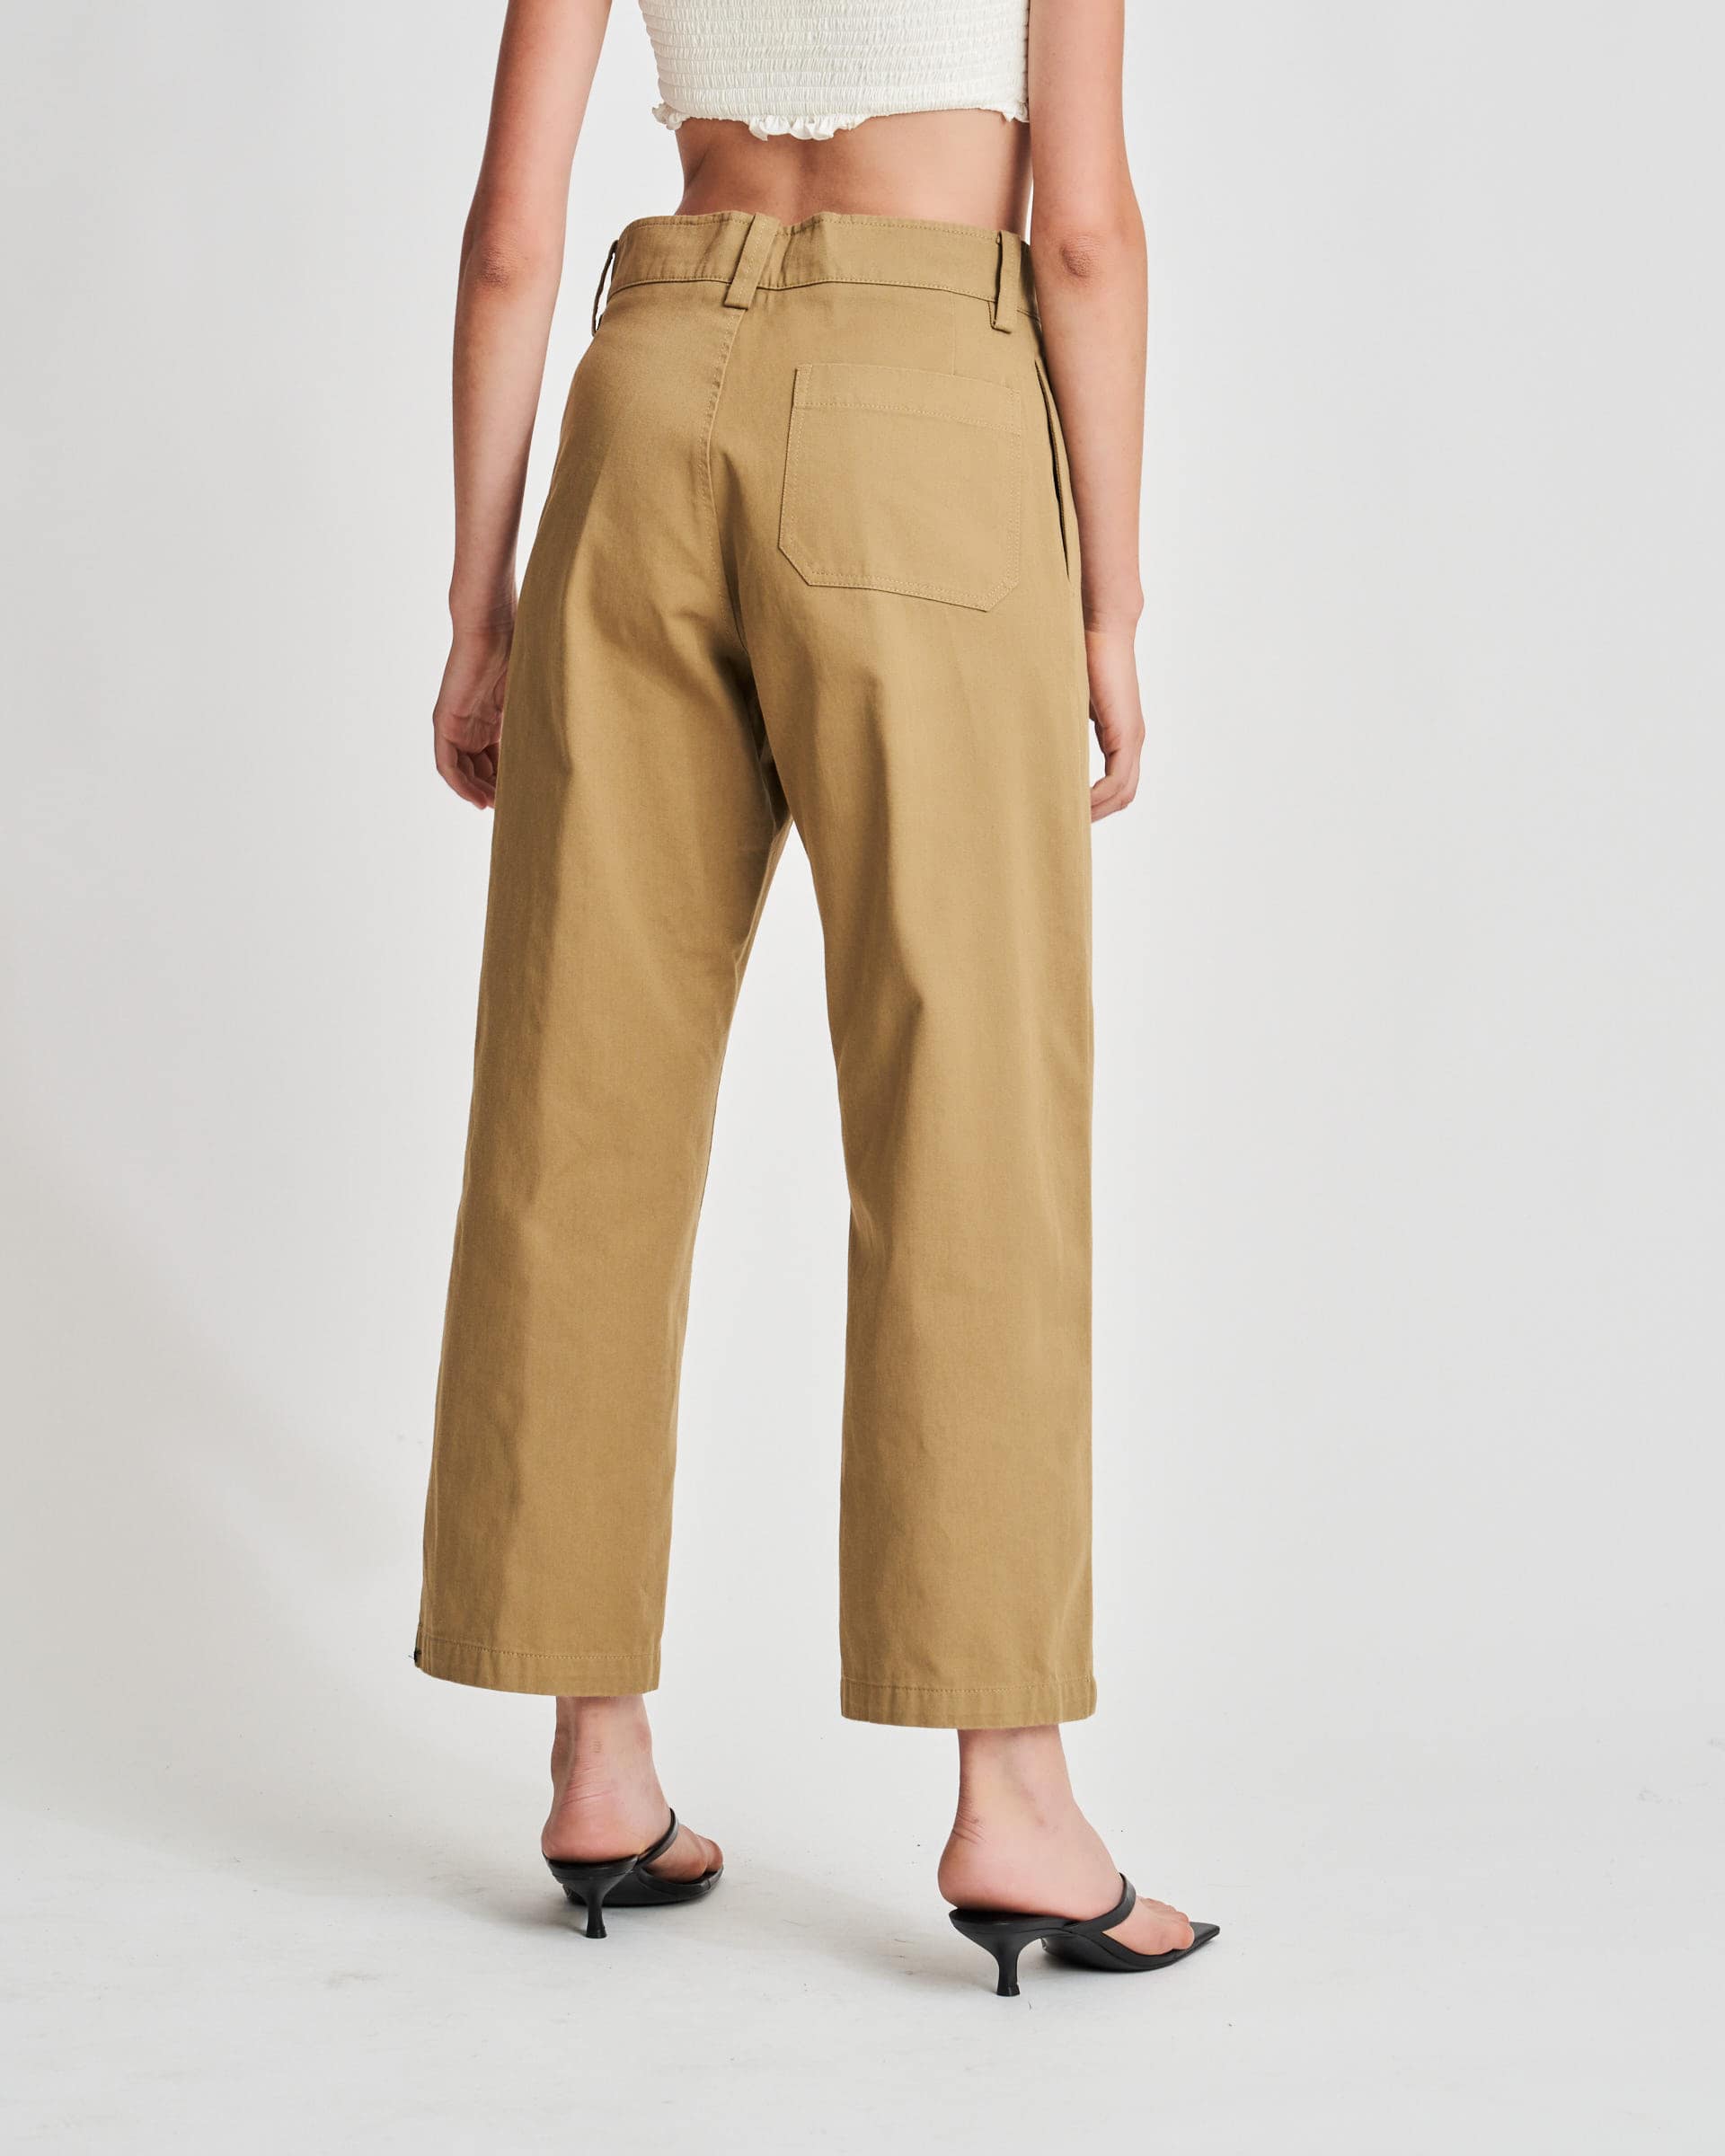 The Market Store | Pants With Back Pocket